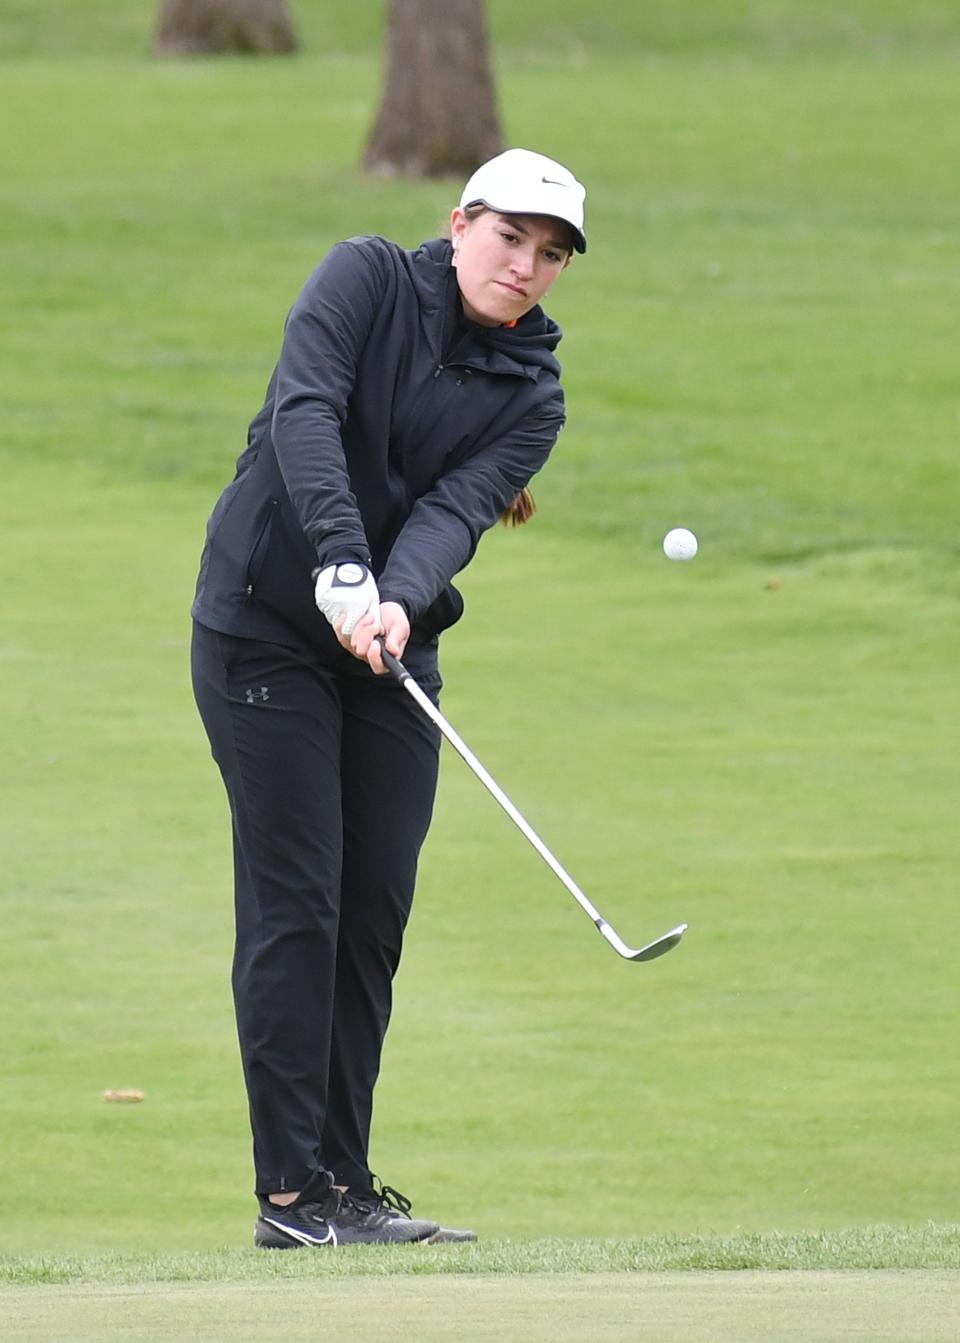 Ames' Emersen Motl finished just inside the top-50 at the state tournament a season ago.